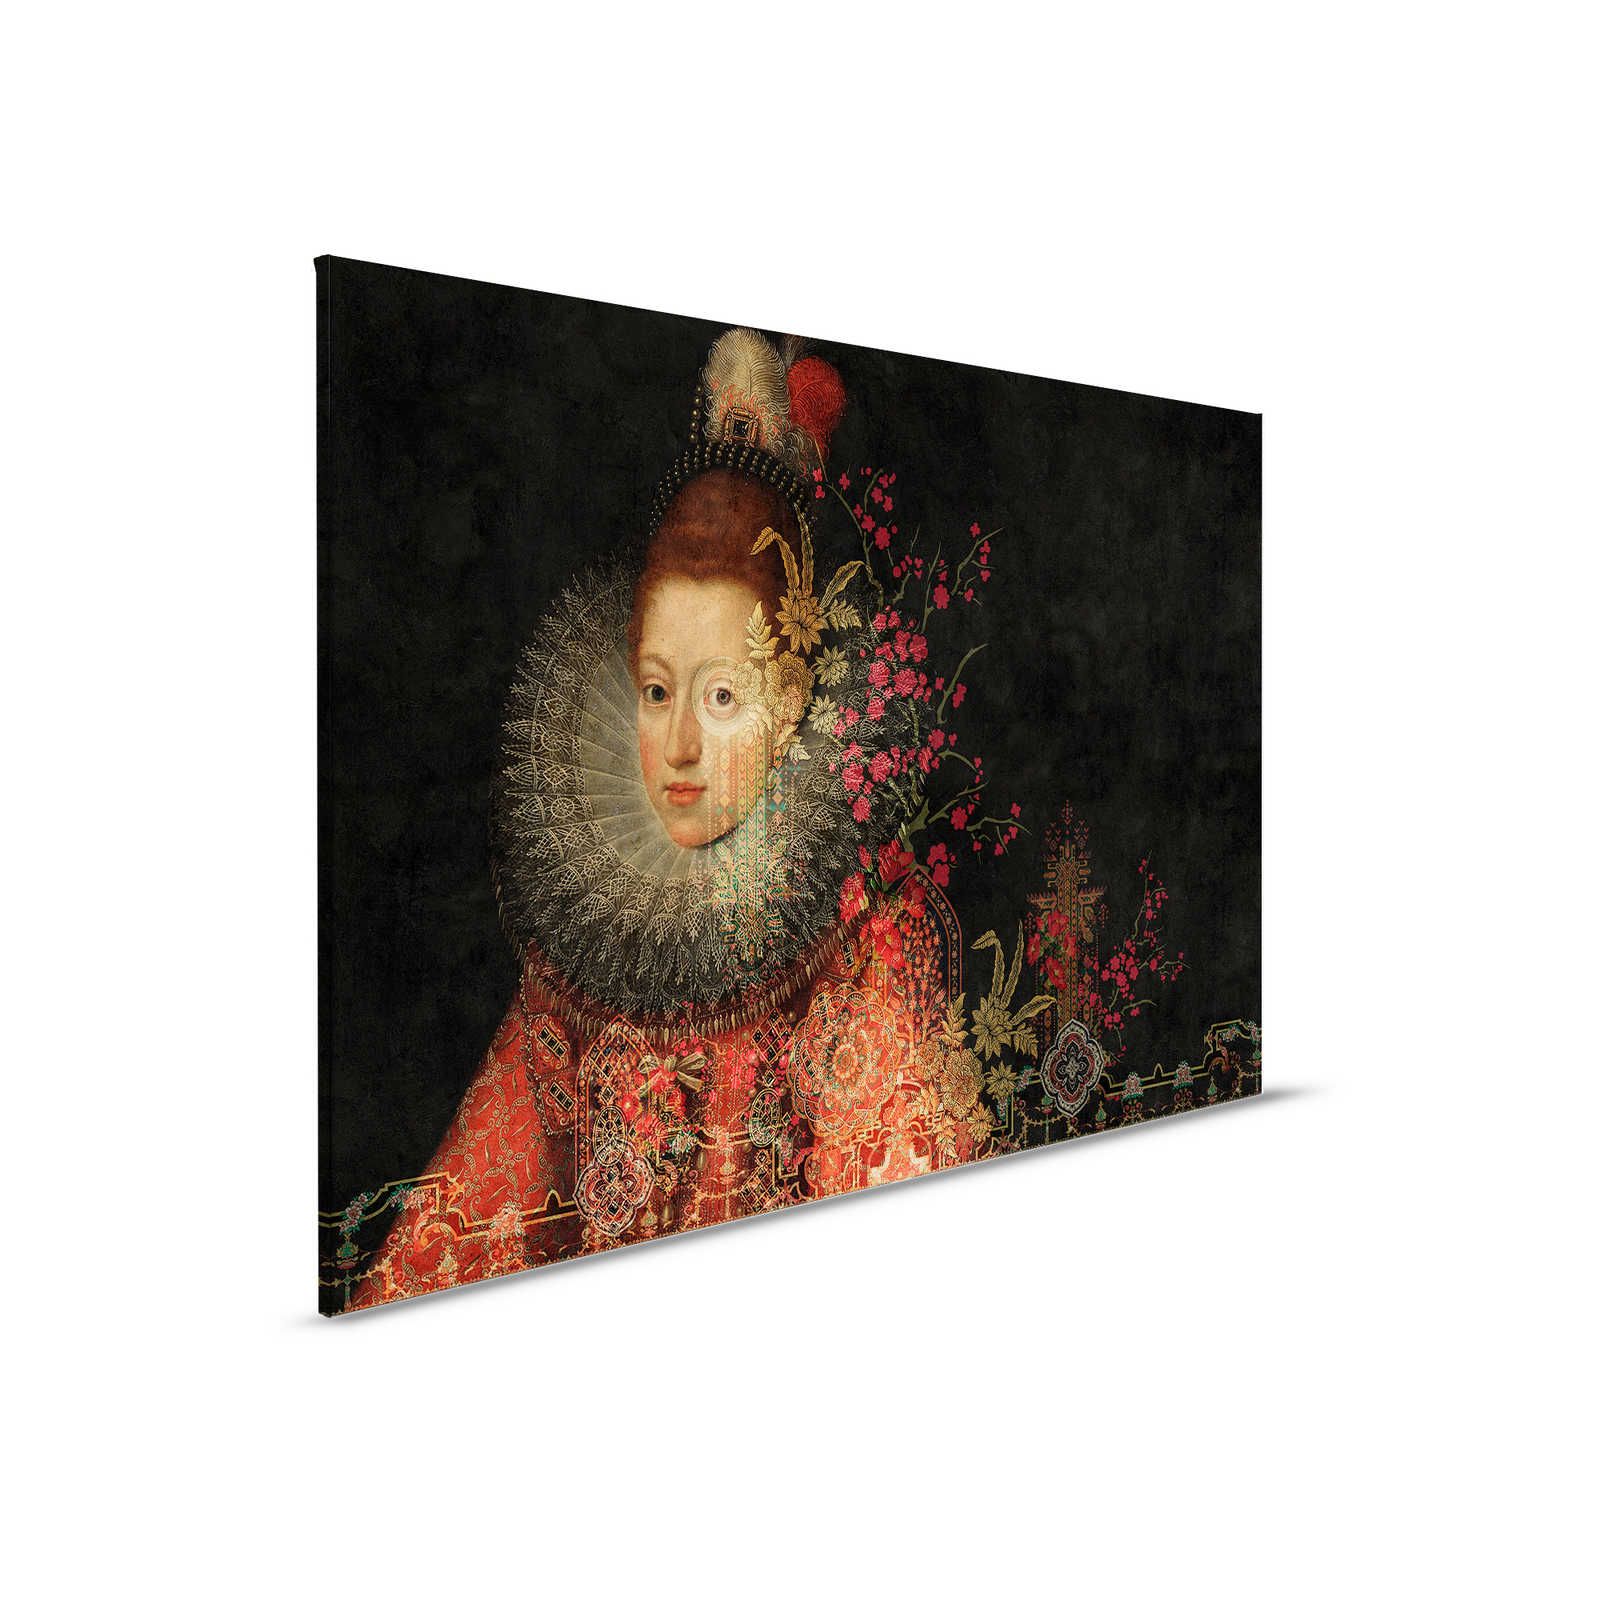 In the Gallery 1 - Canvas painting Classic Paintings & Flowers Graphic - 0,90 m x 0,60 m
